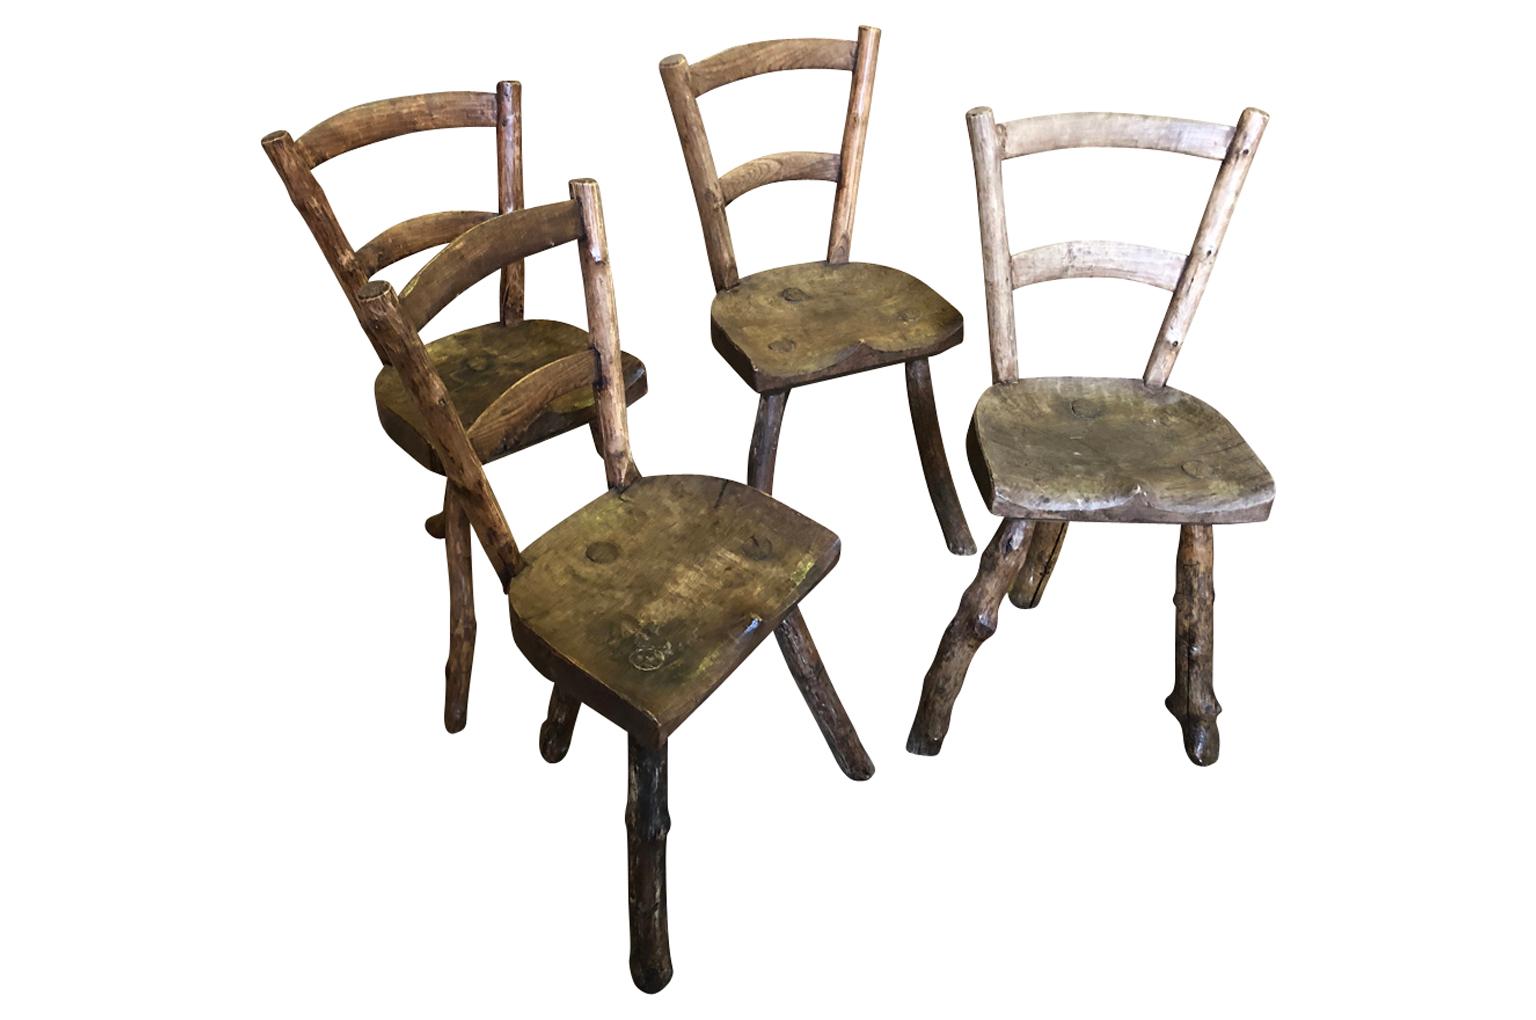 A very charming early 19th century set of 4 primitive chairs from the Provence region of France in naturally washed apple and chestnut wood. Delightful accent pieces.